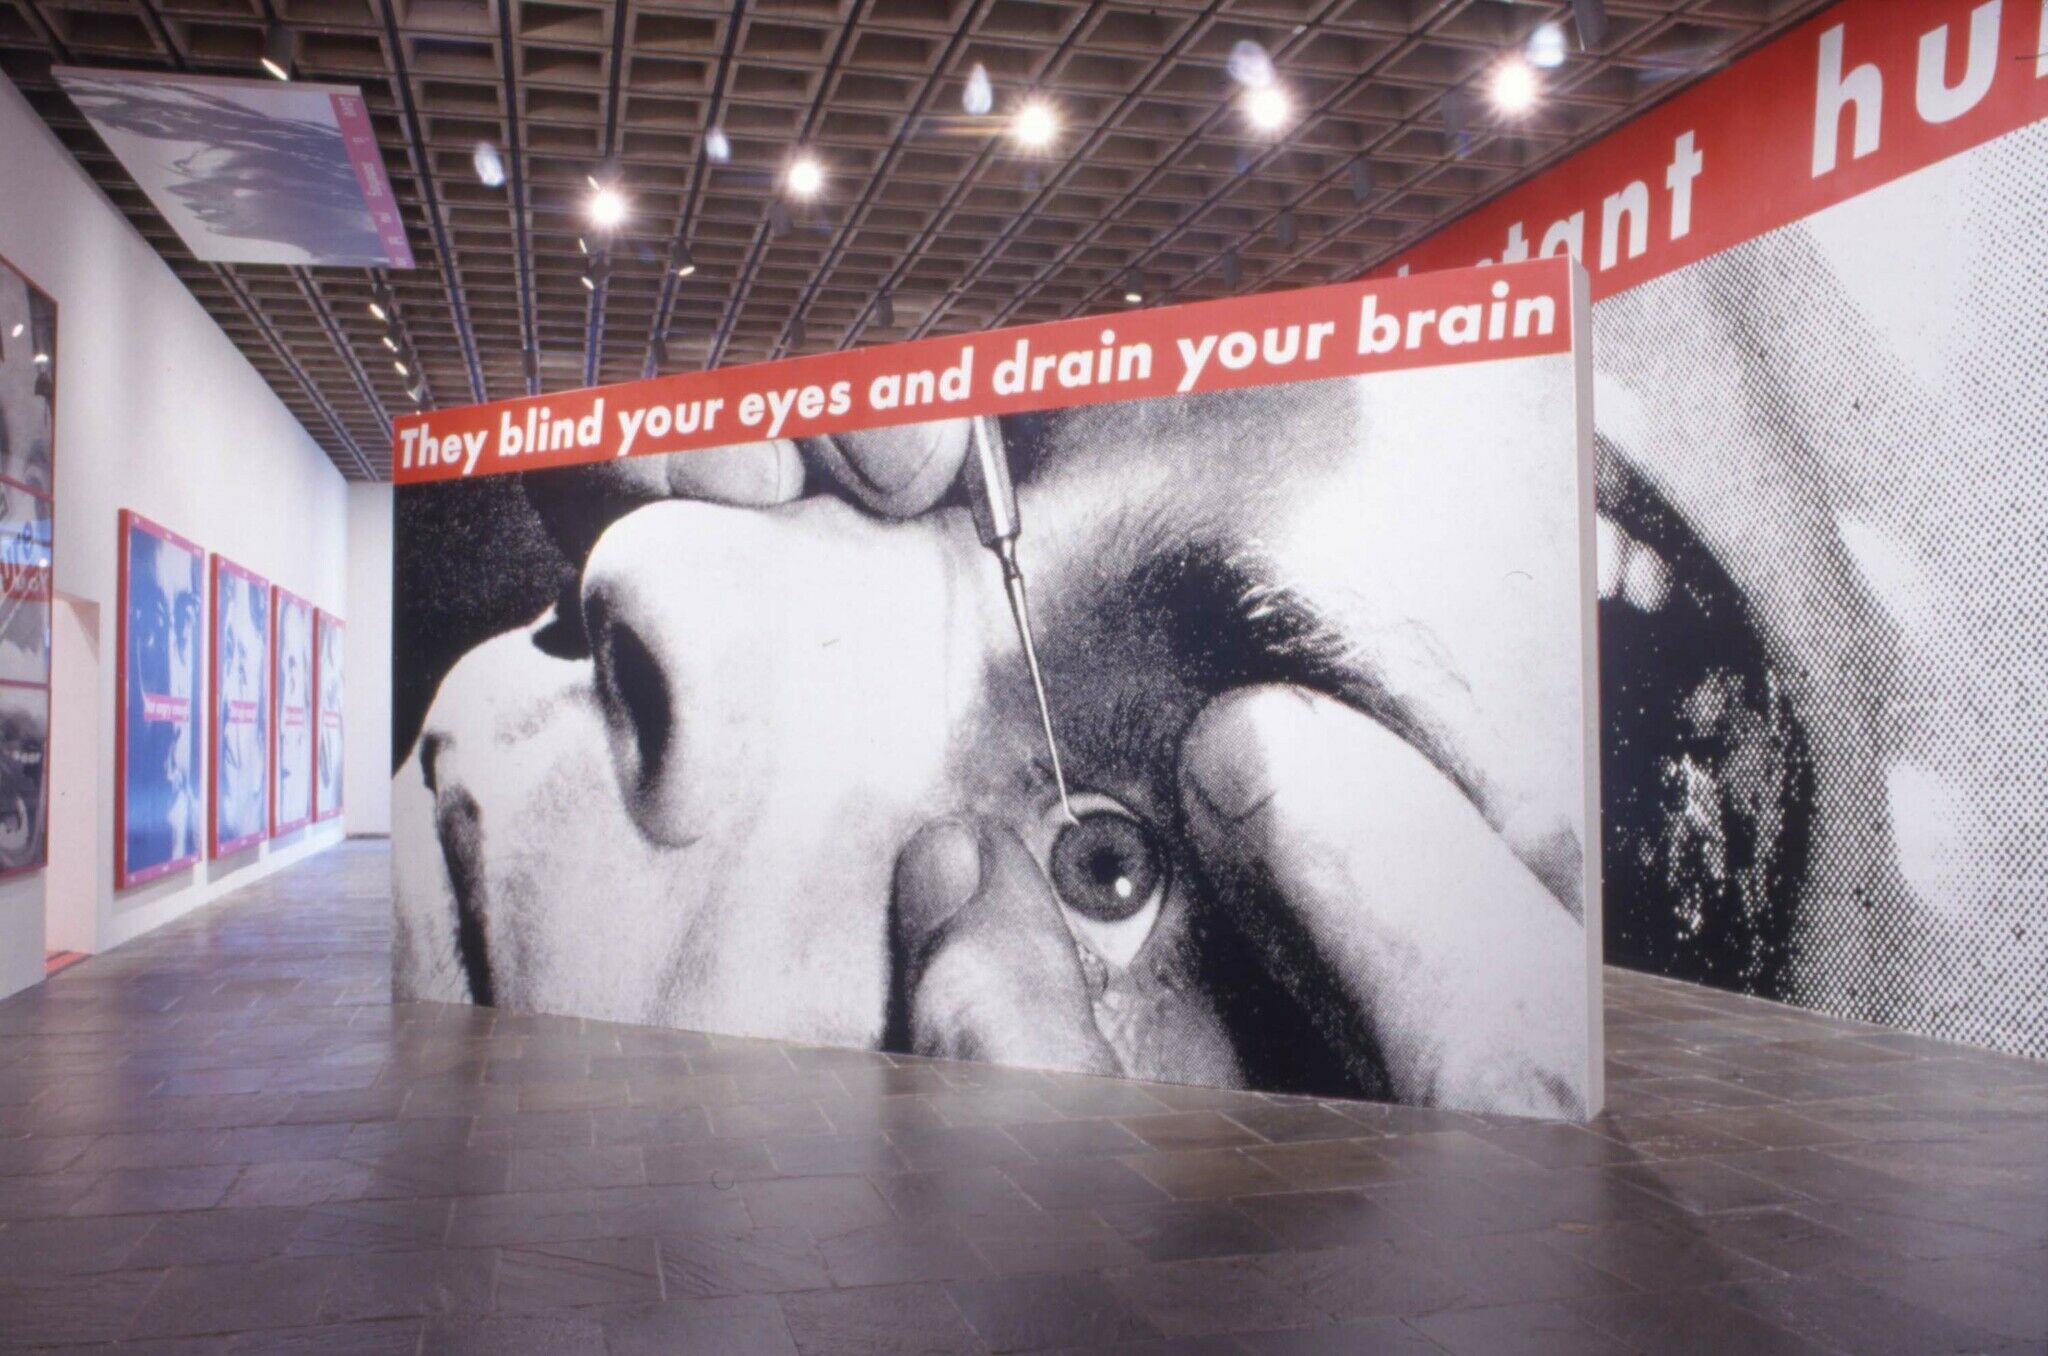 A wall in a gallery covered with a black and white photograph of a face with a tool pointed towards the eye.